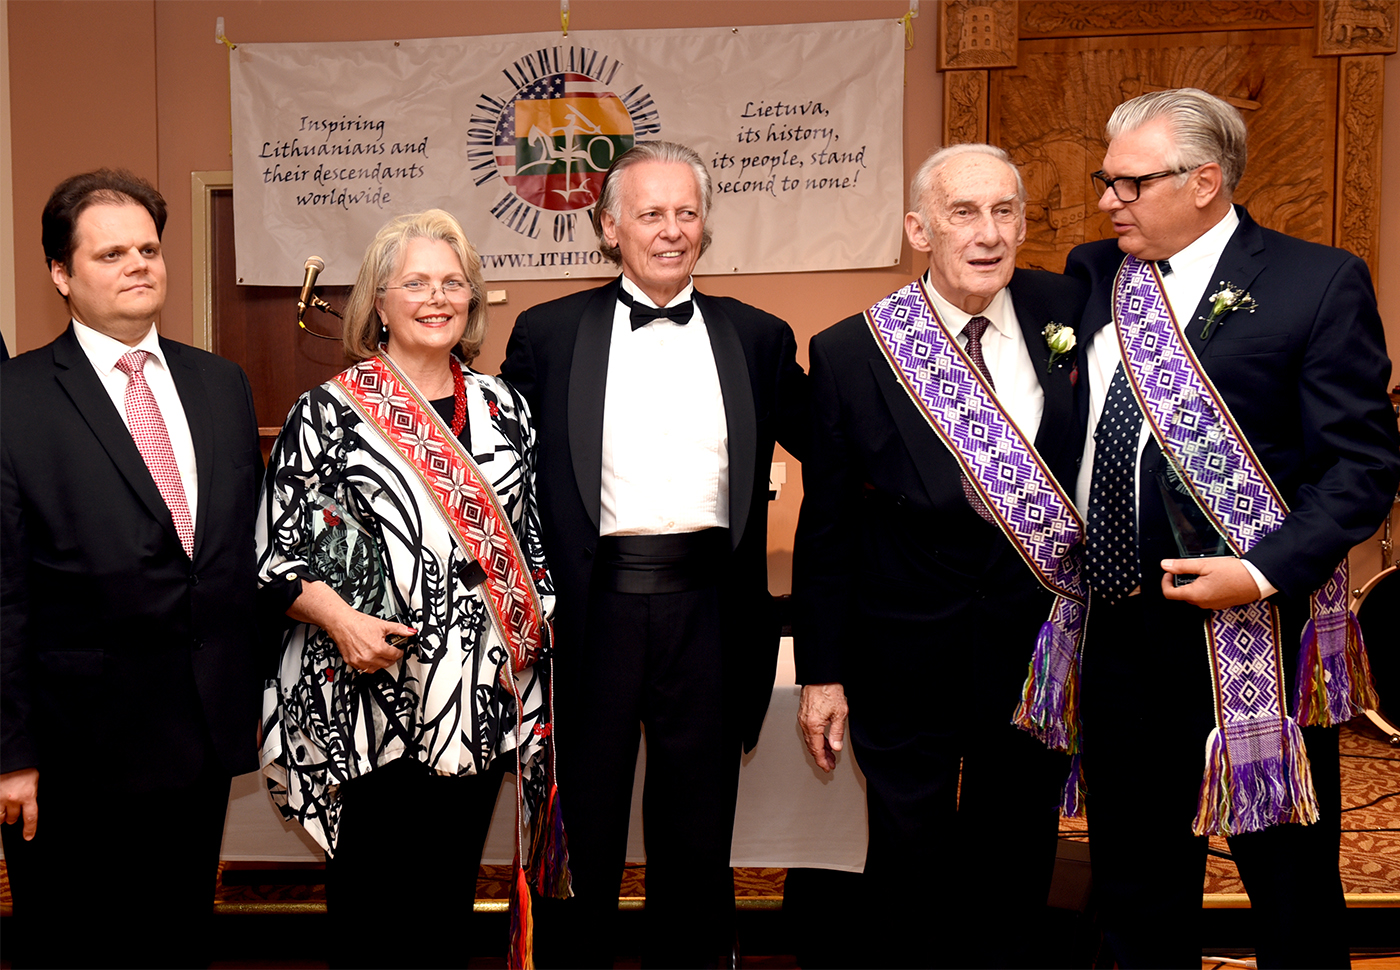 2015 National Lithuanian American Hall of Fame inductees: from left, actress Ann Jillian, NLAFH president Jon Platakis, solist Arnold Voketaitis and actor Vyto Ruginis.